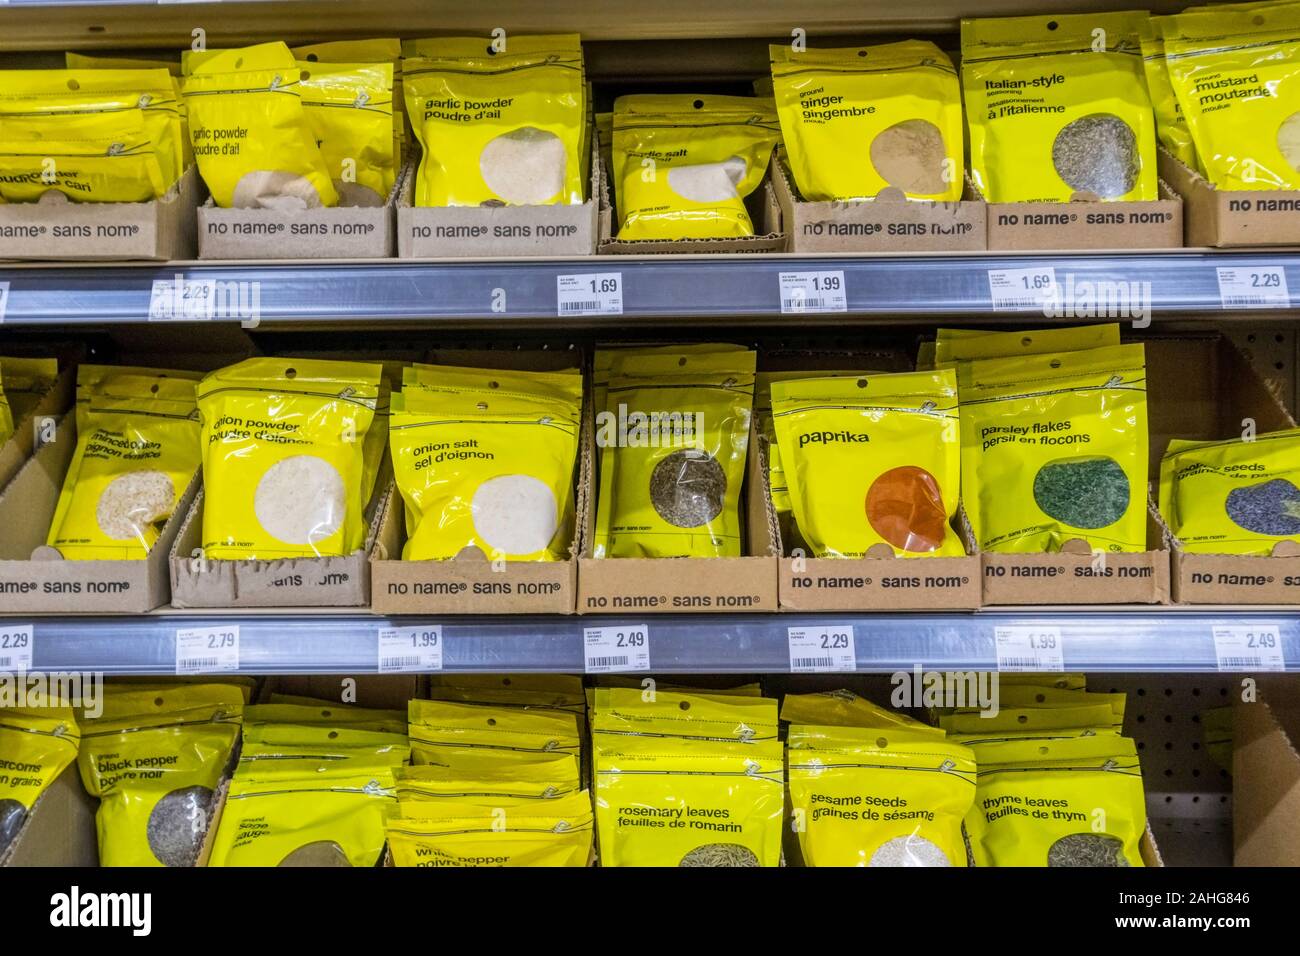 No Name / Sans Nom brand spices for sale on the shelves of a Canadian supermarket. Stock Photo